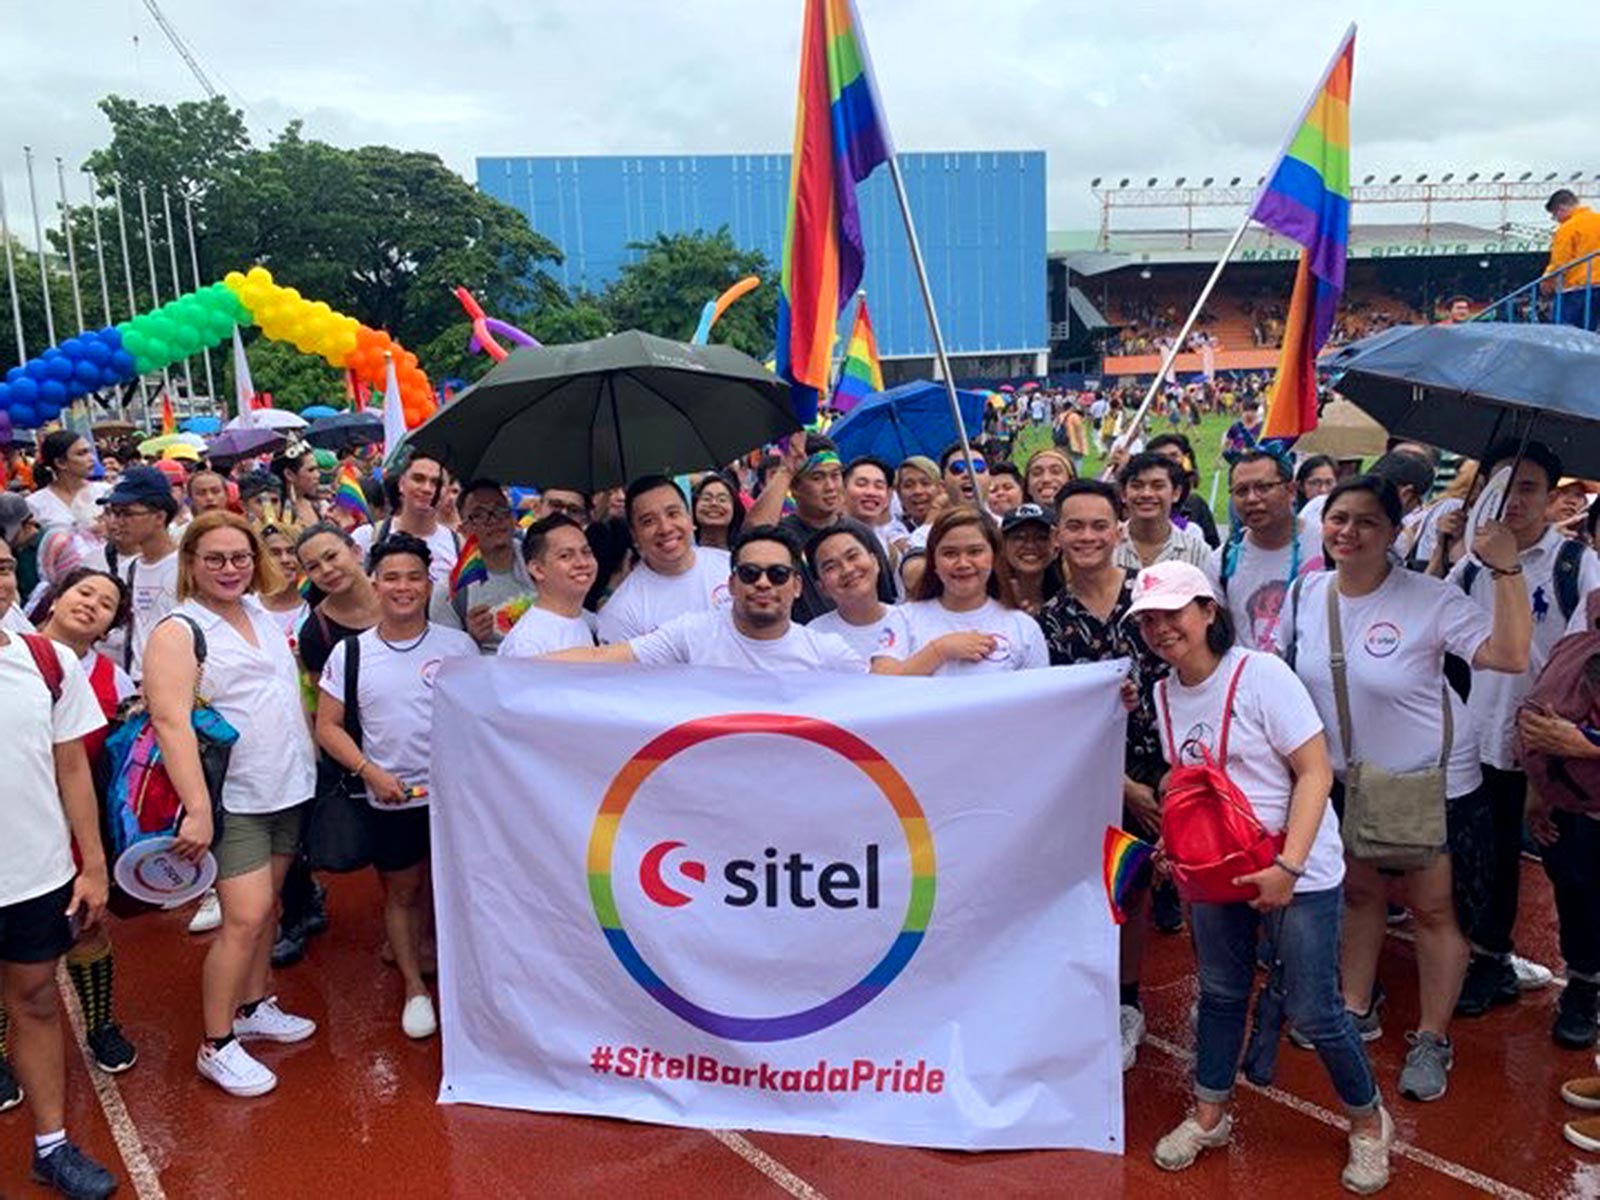 Sitel Reiterates Mitment To Inclusion And Diversity At Pride